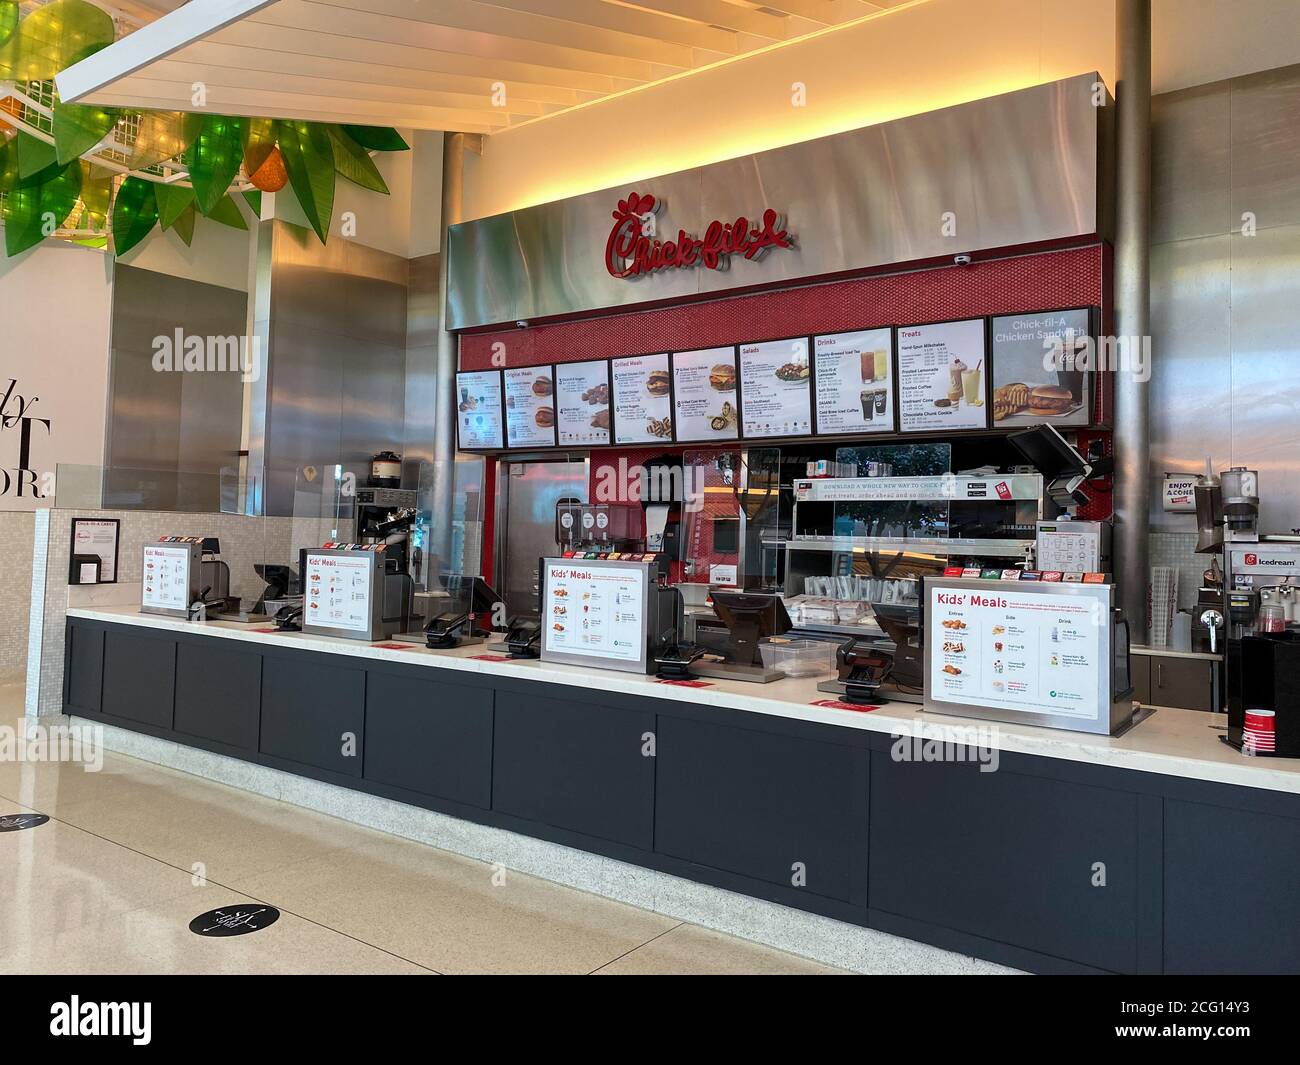 Chick Fil A Franchise High Resolution Stock Photography and Images - Alamy